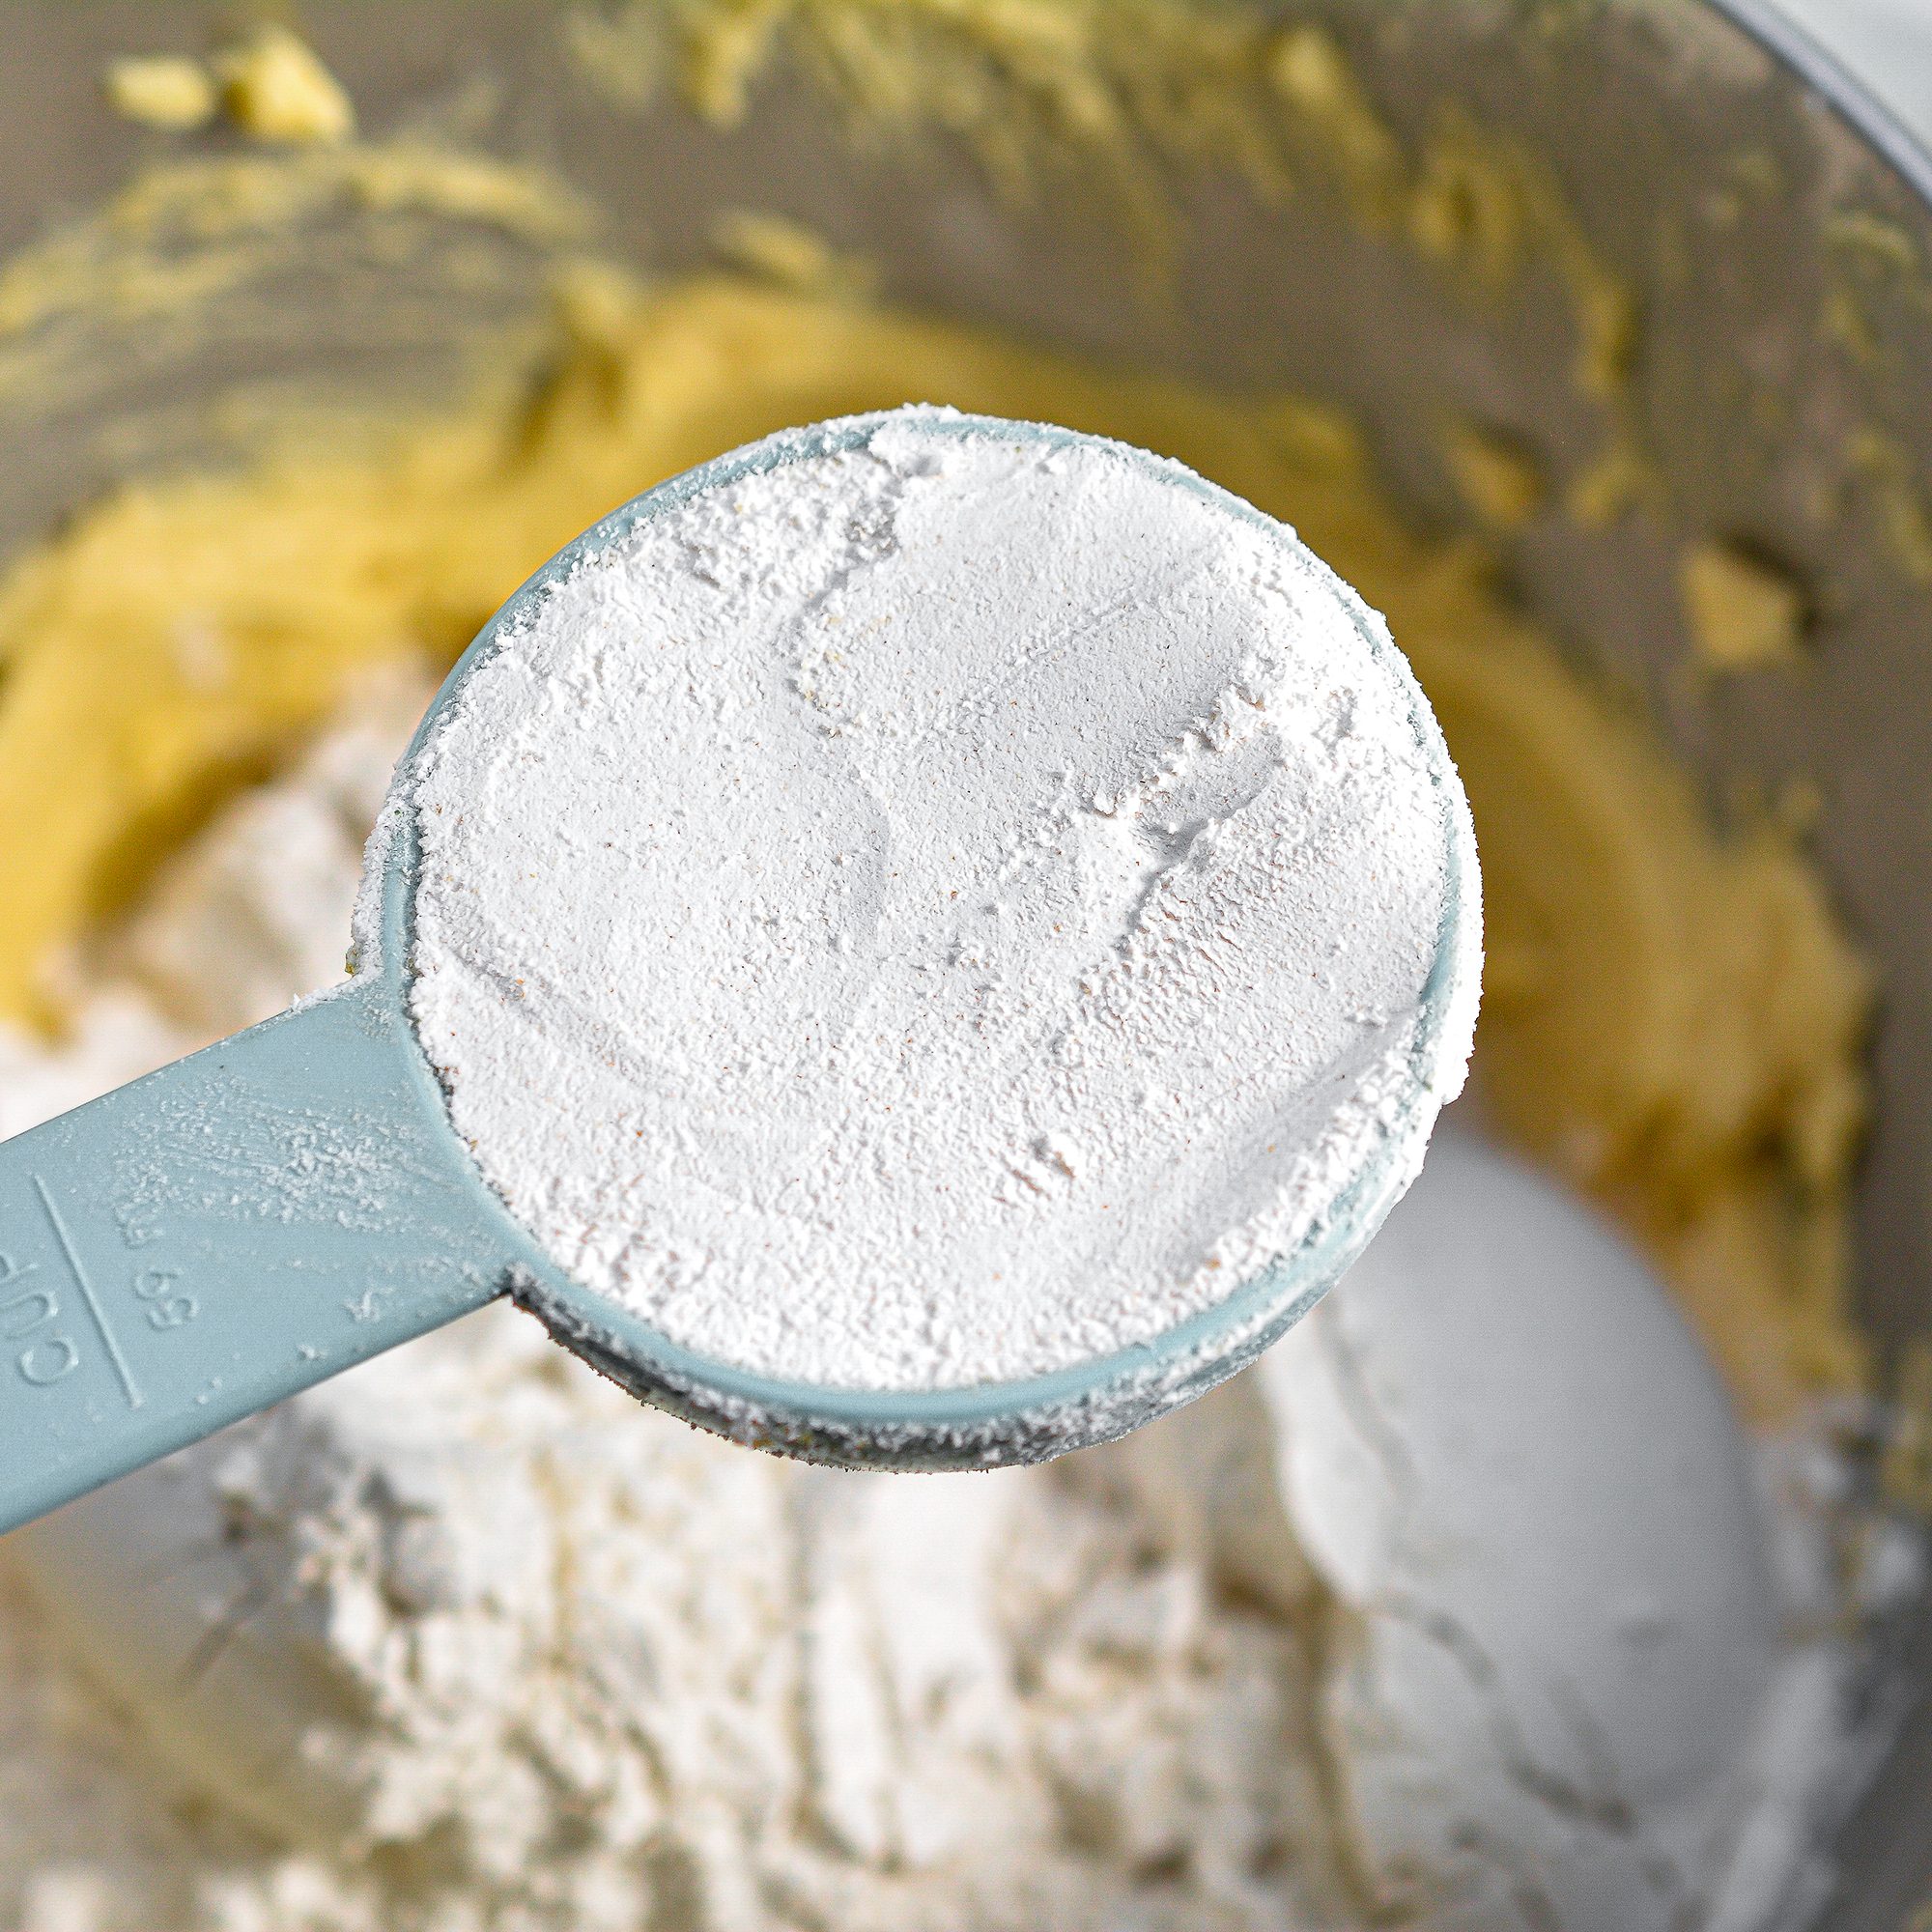 Mix in the flour, baking soda and salt until the mixture is well combined and smooth.